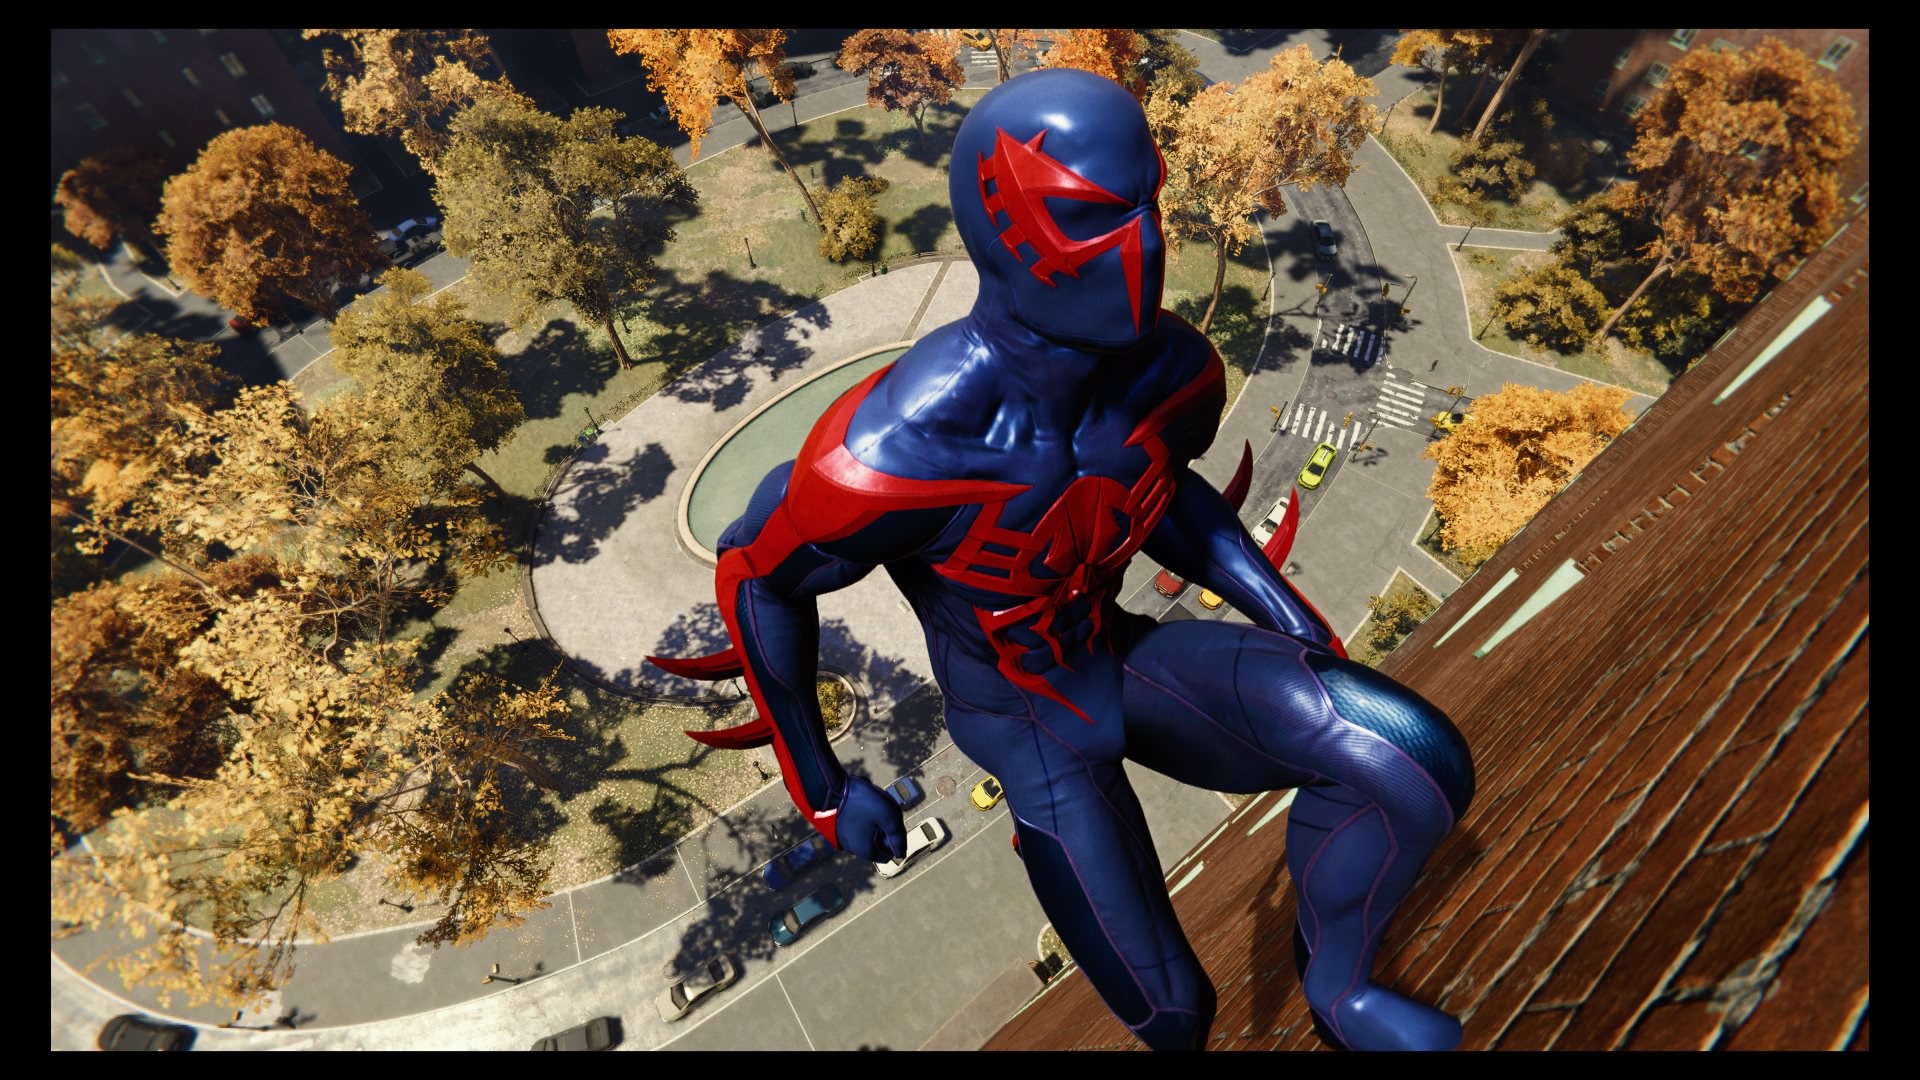 i plan to make a sort of hybrid spiderman costume from the future foundatio...